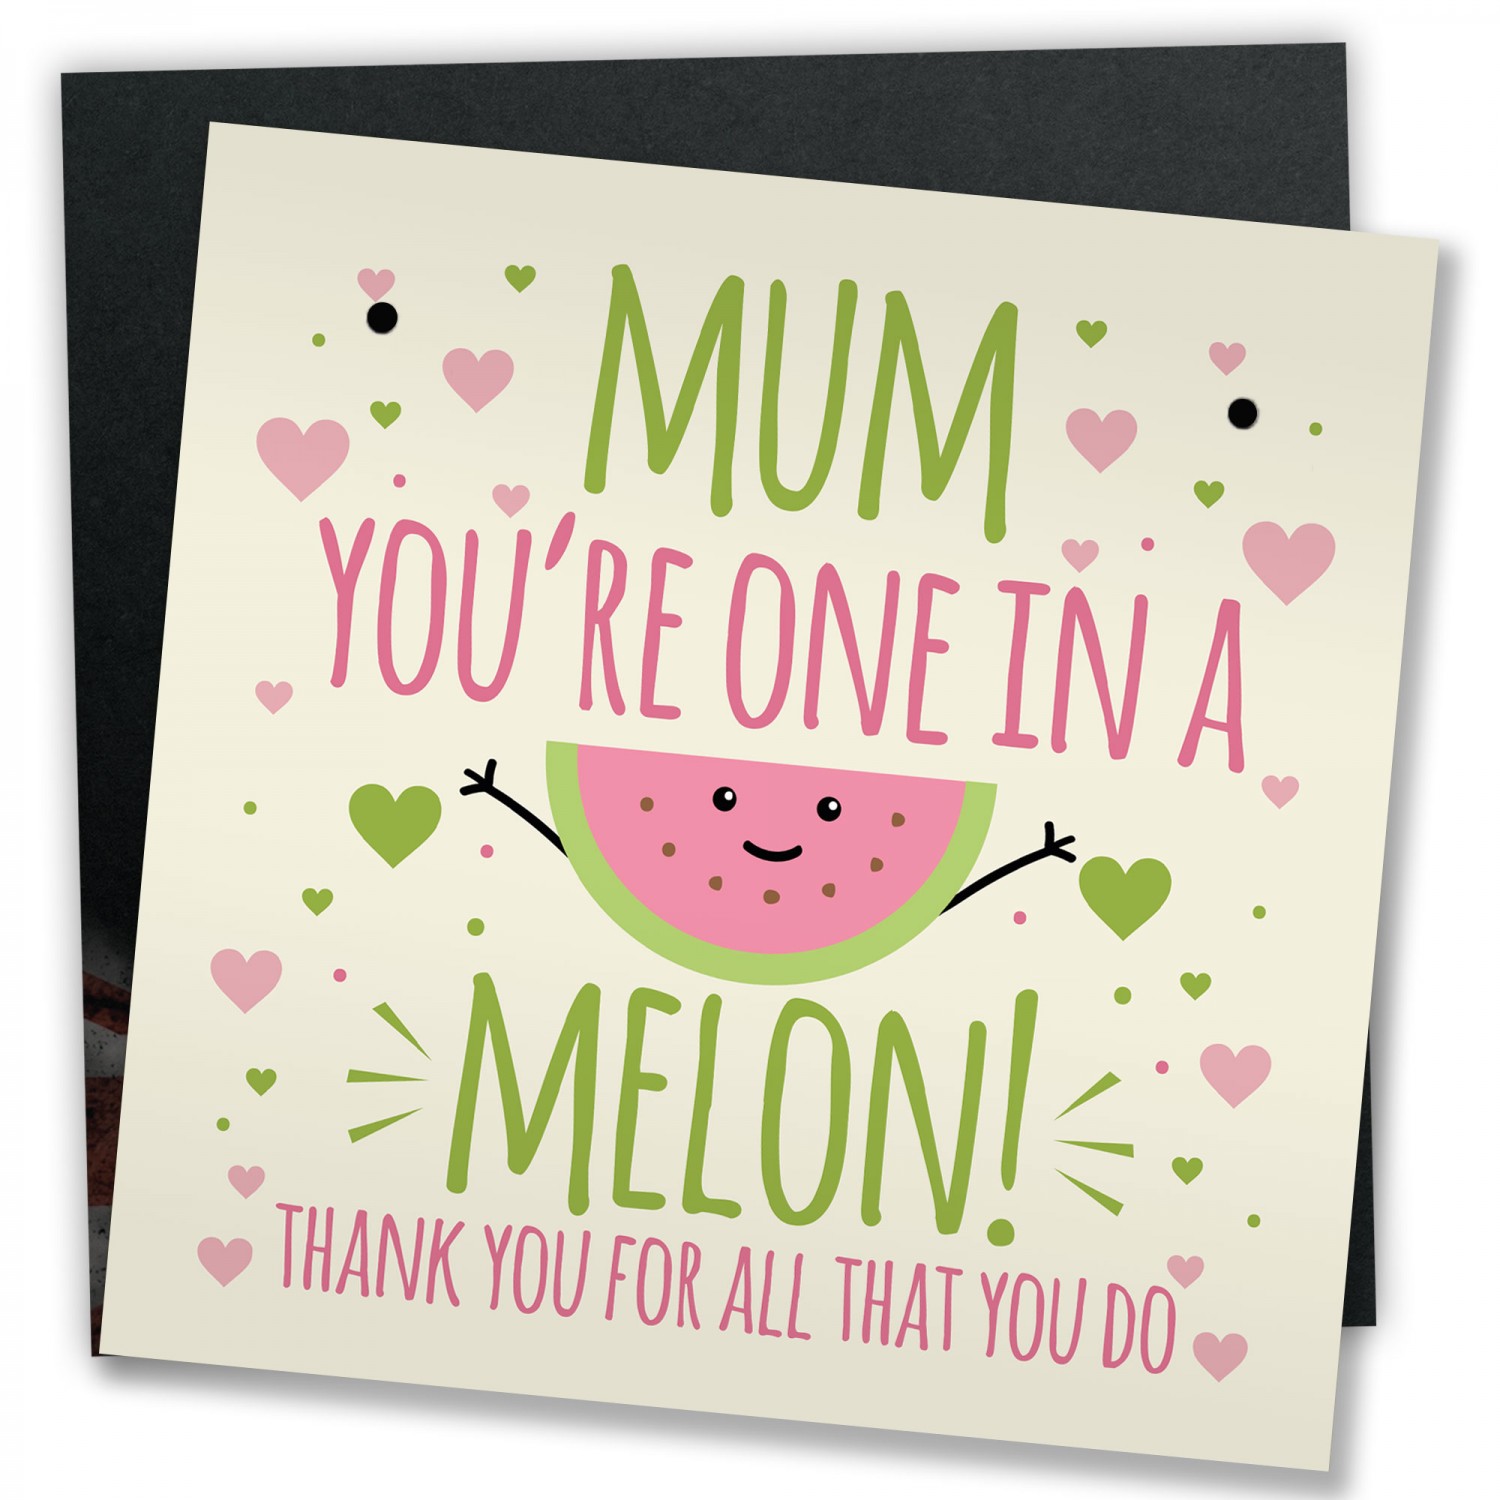 Pun Funny Mother's Day Greetings Card Joke Mother's Day Gift